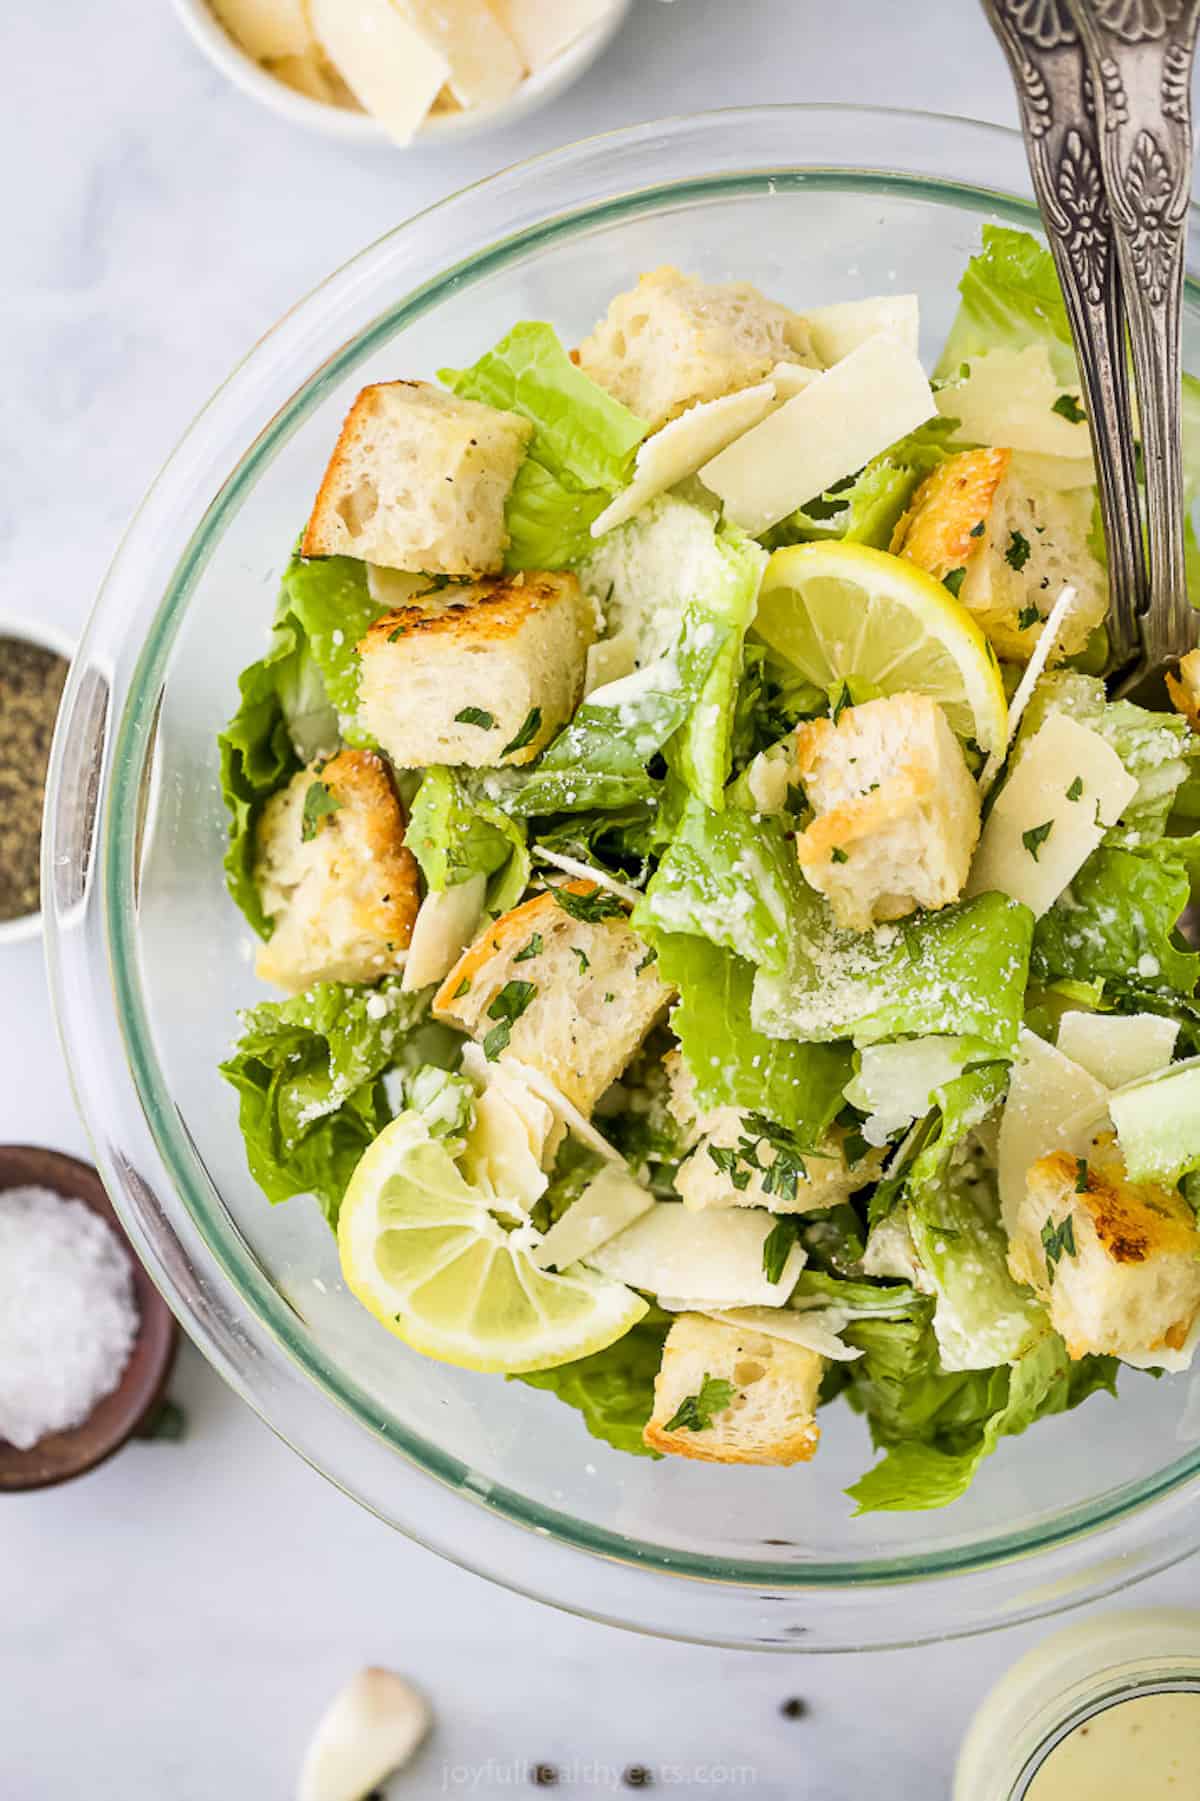 Caesar salad inside of a large glass mixing bowl with two forks inside